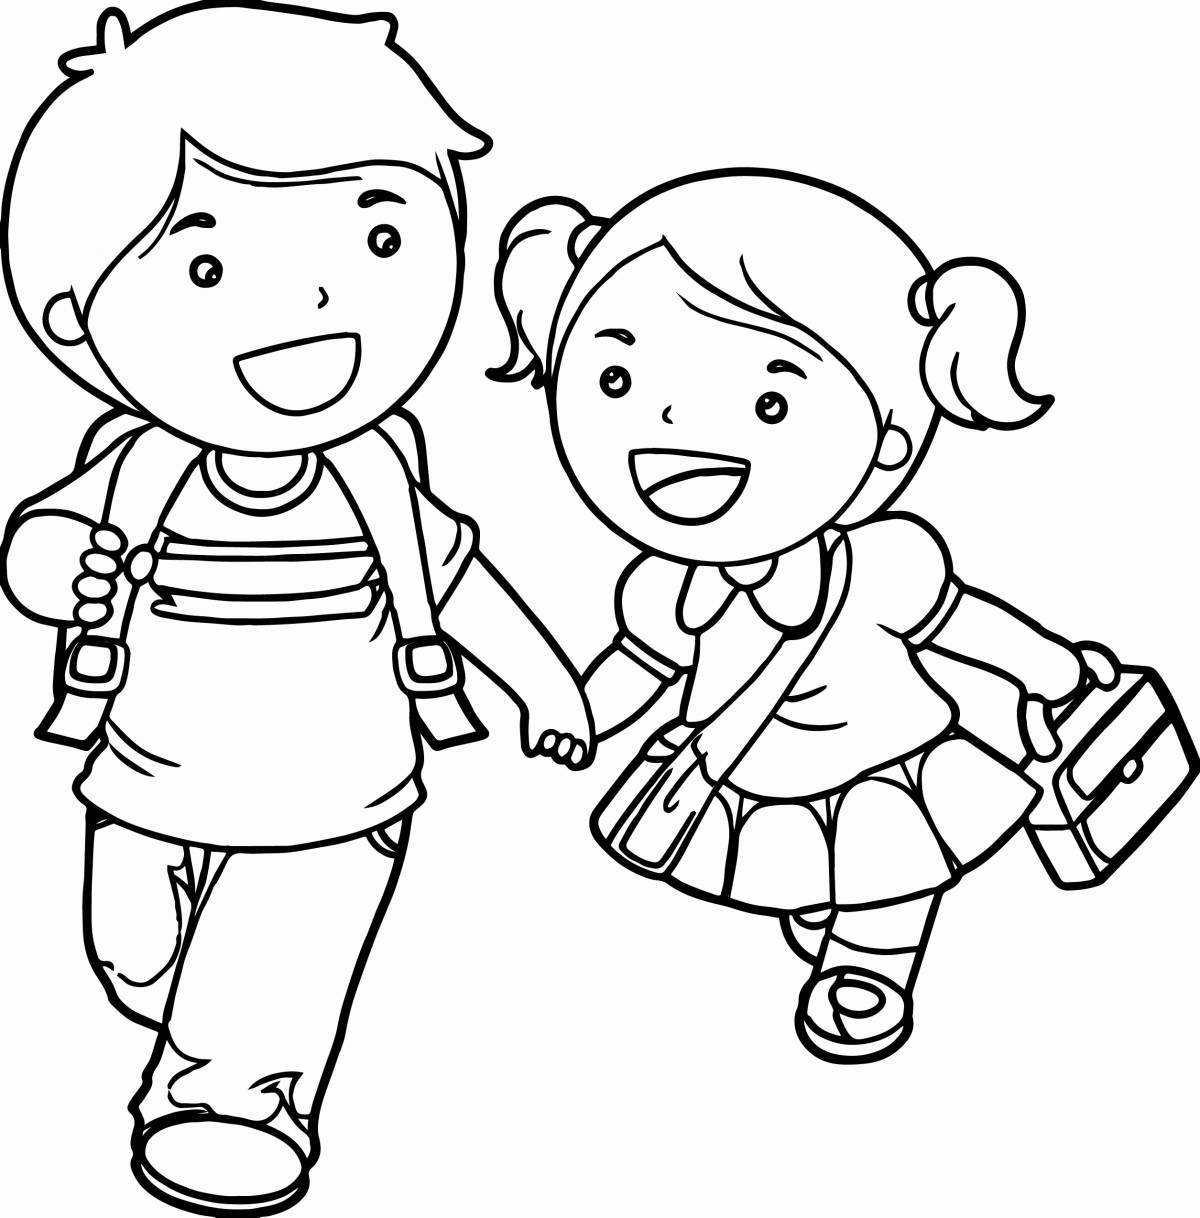 Colourful laughter friends coloring page